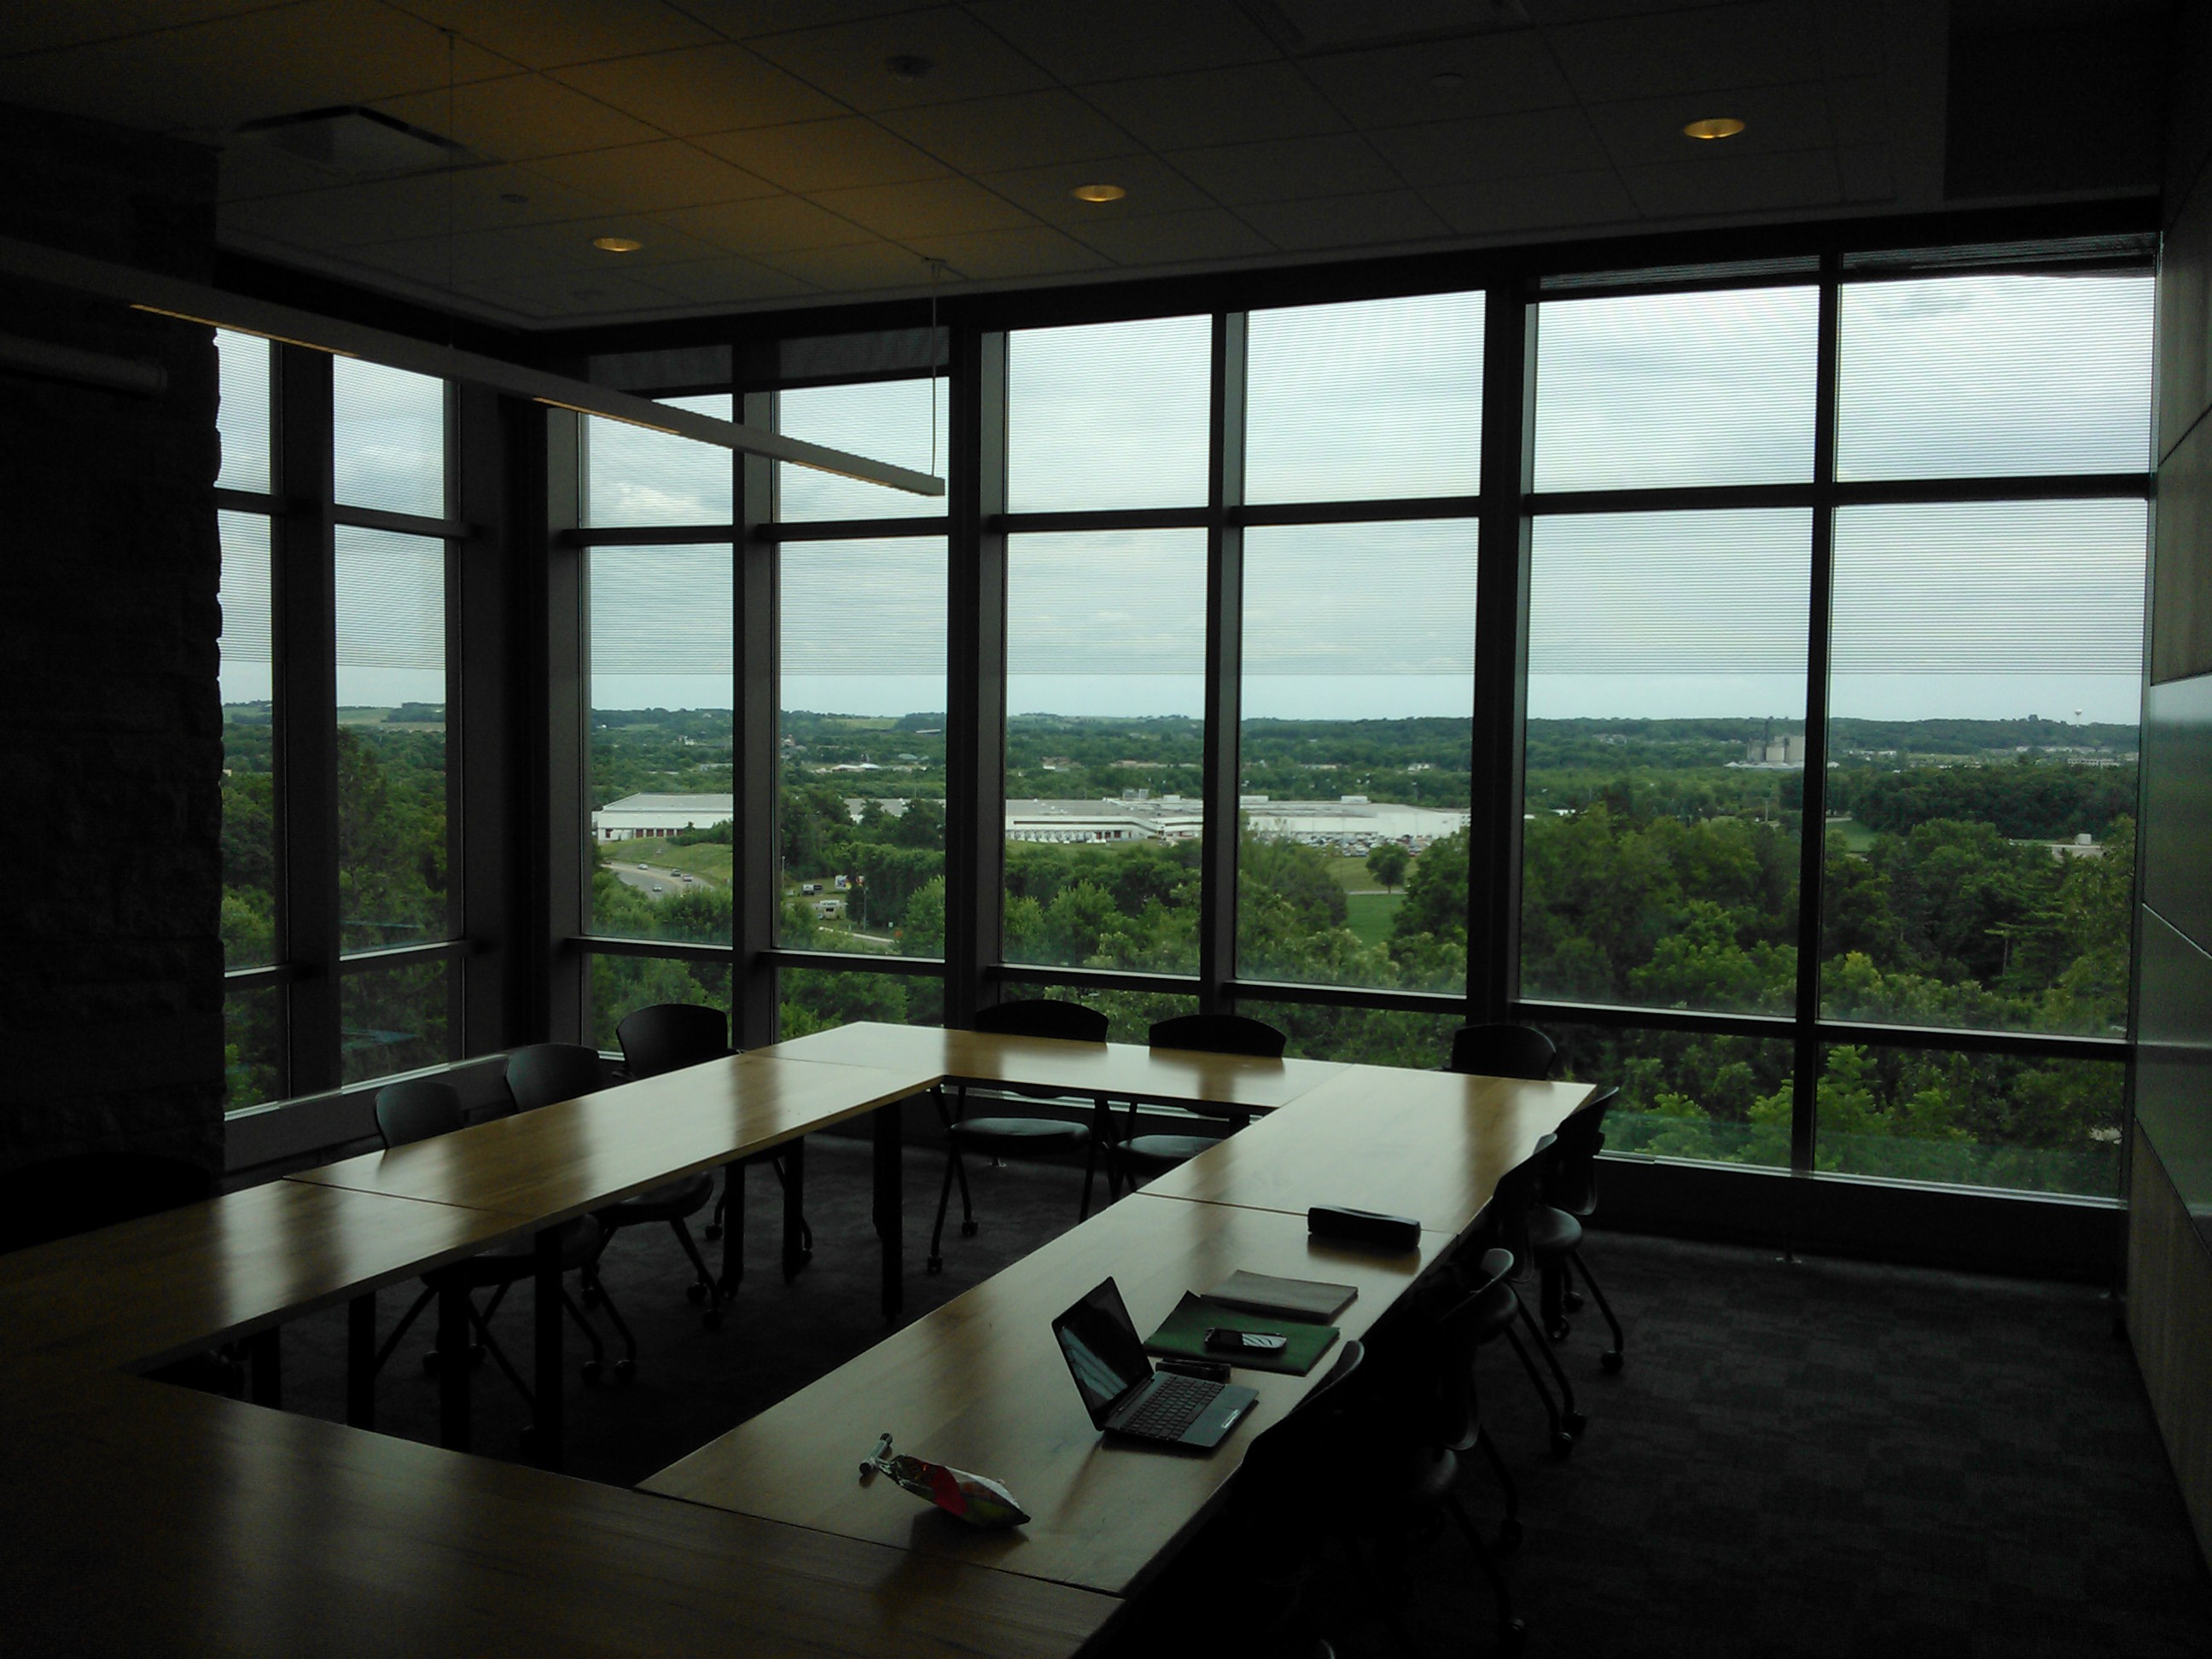 View From Regents Hall Classroom - St. Olaf College, Northfield, MN (Erik Bergs)